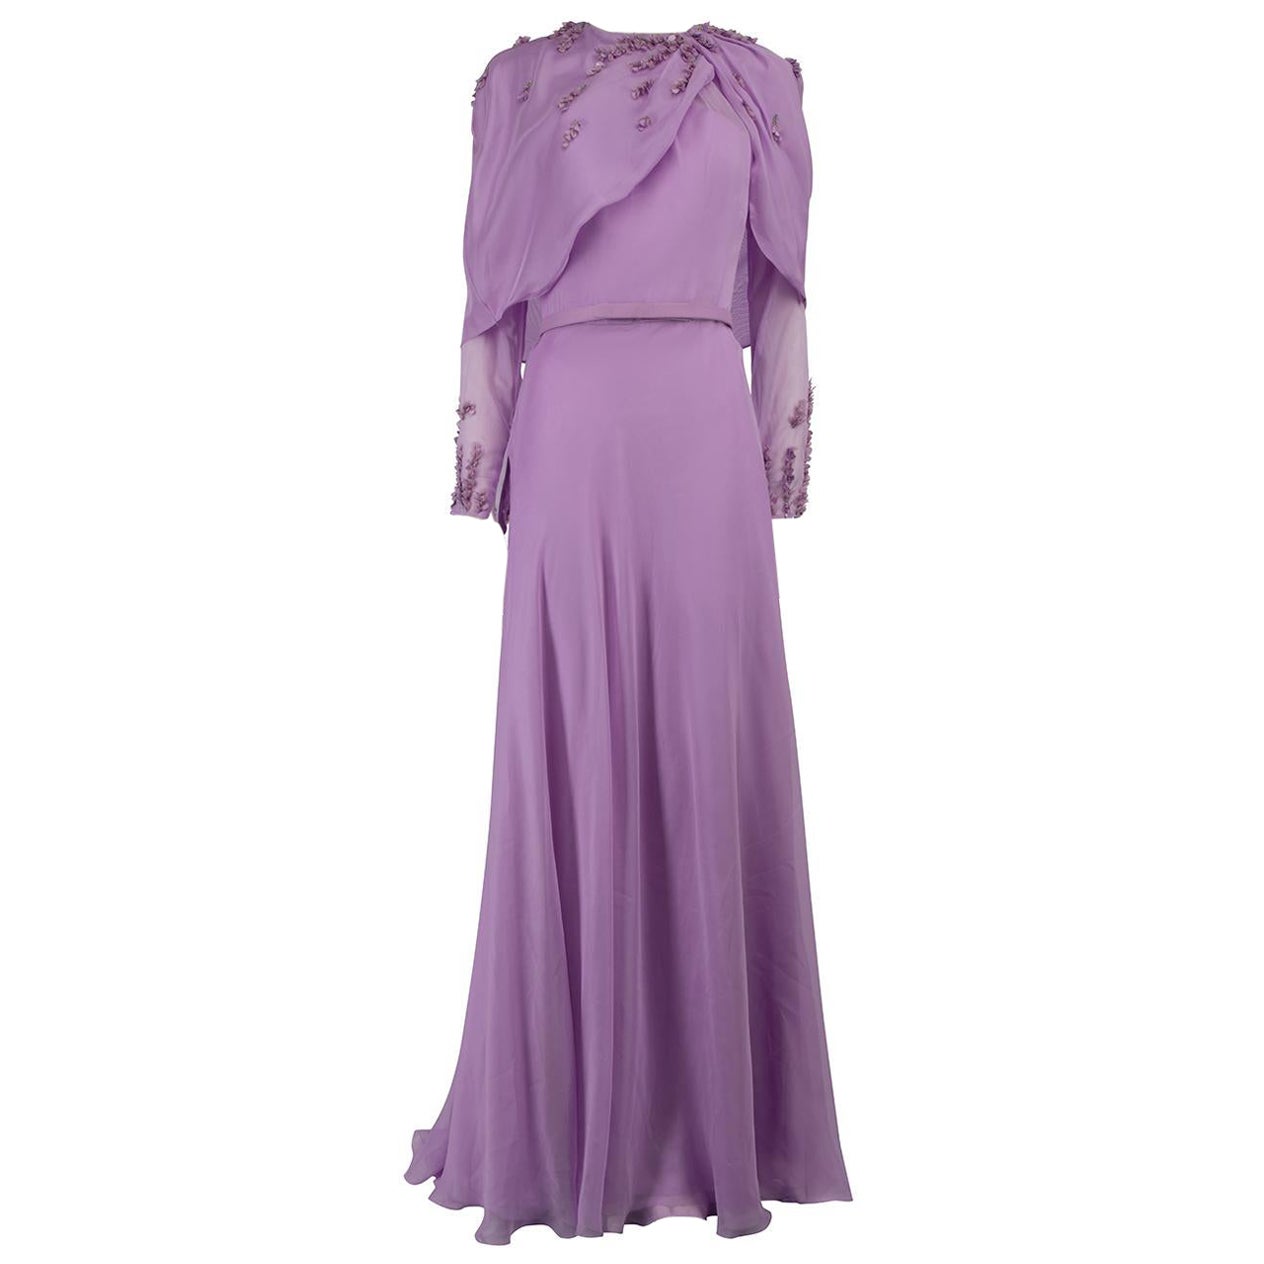 Honayda Purple Flower Embroidered Cape Maxi Dress Size M For Sale